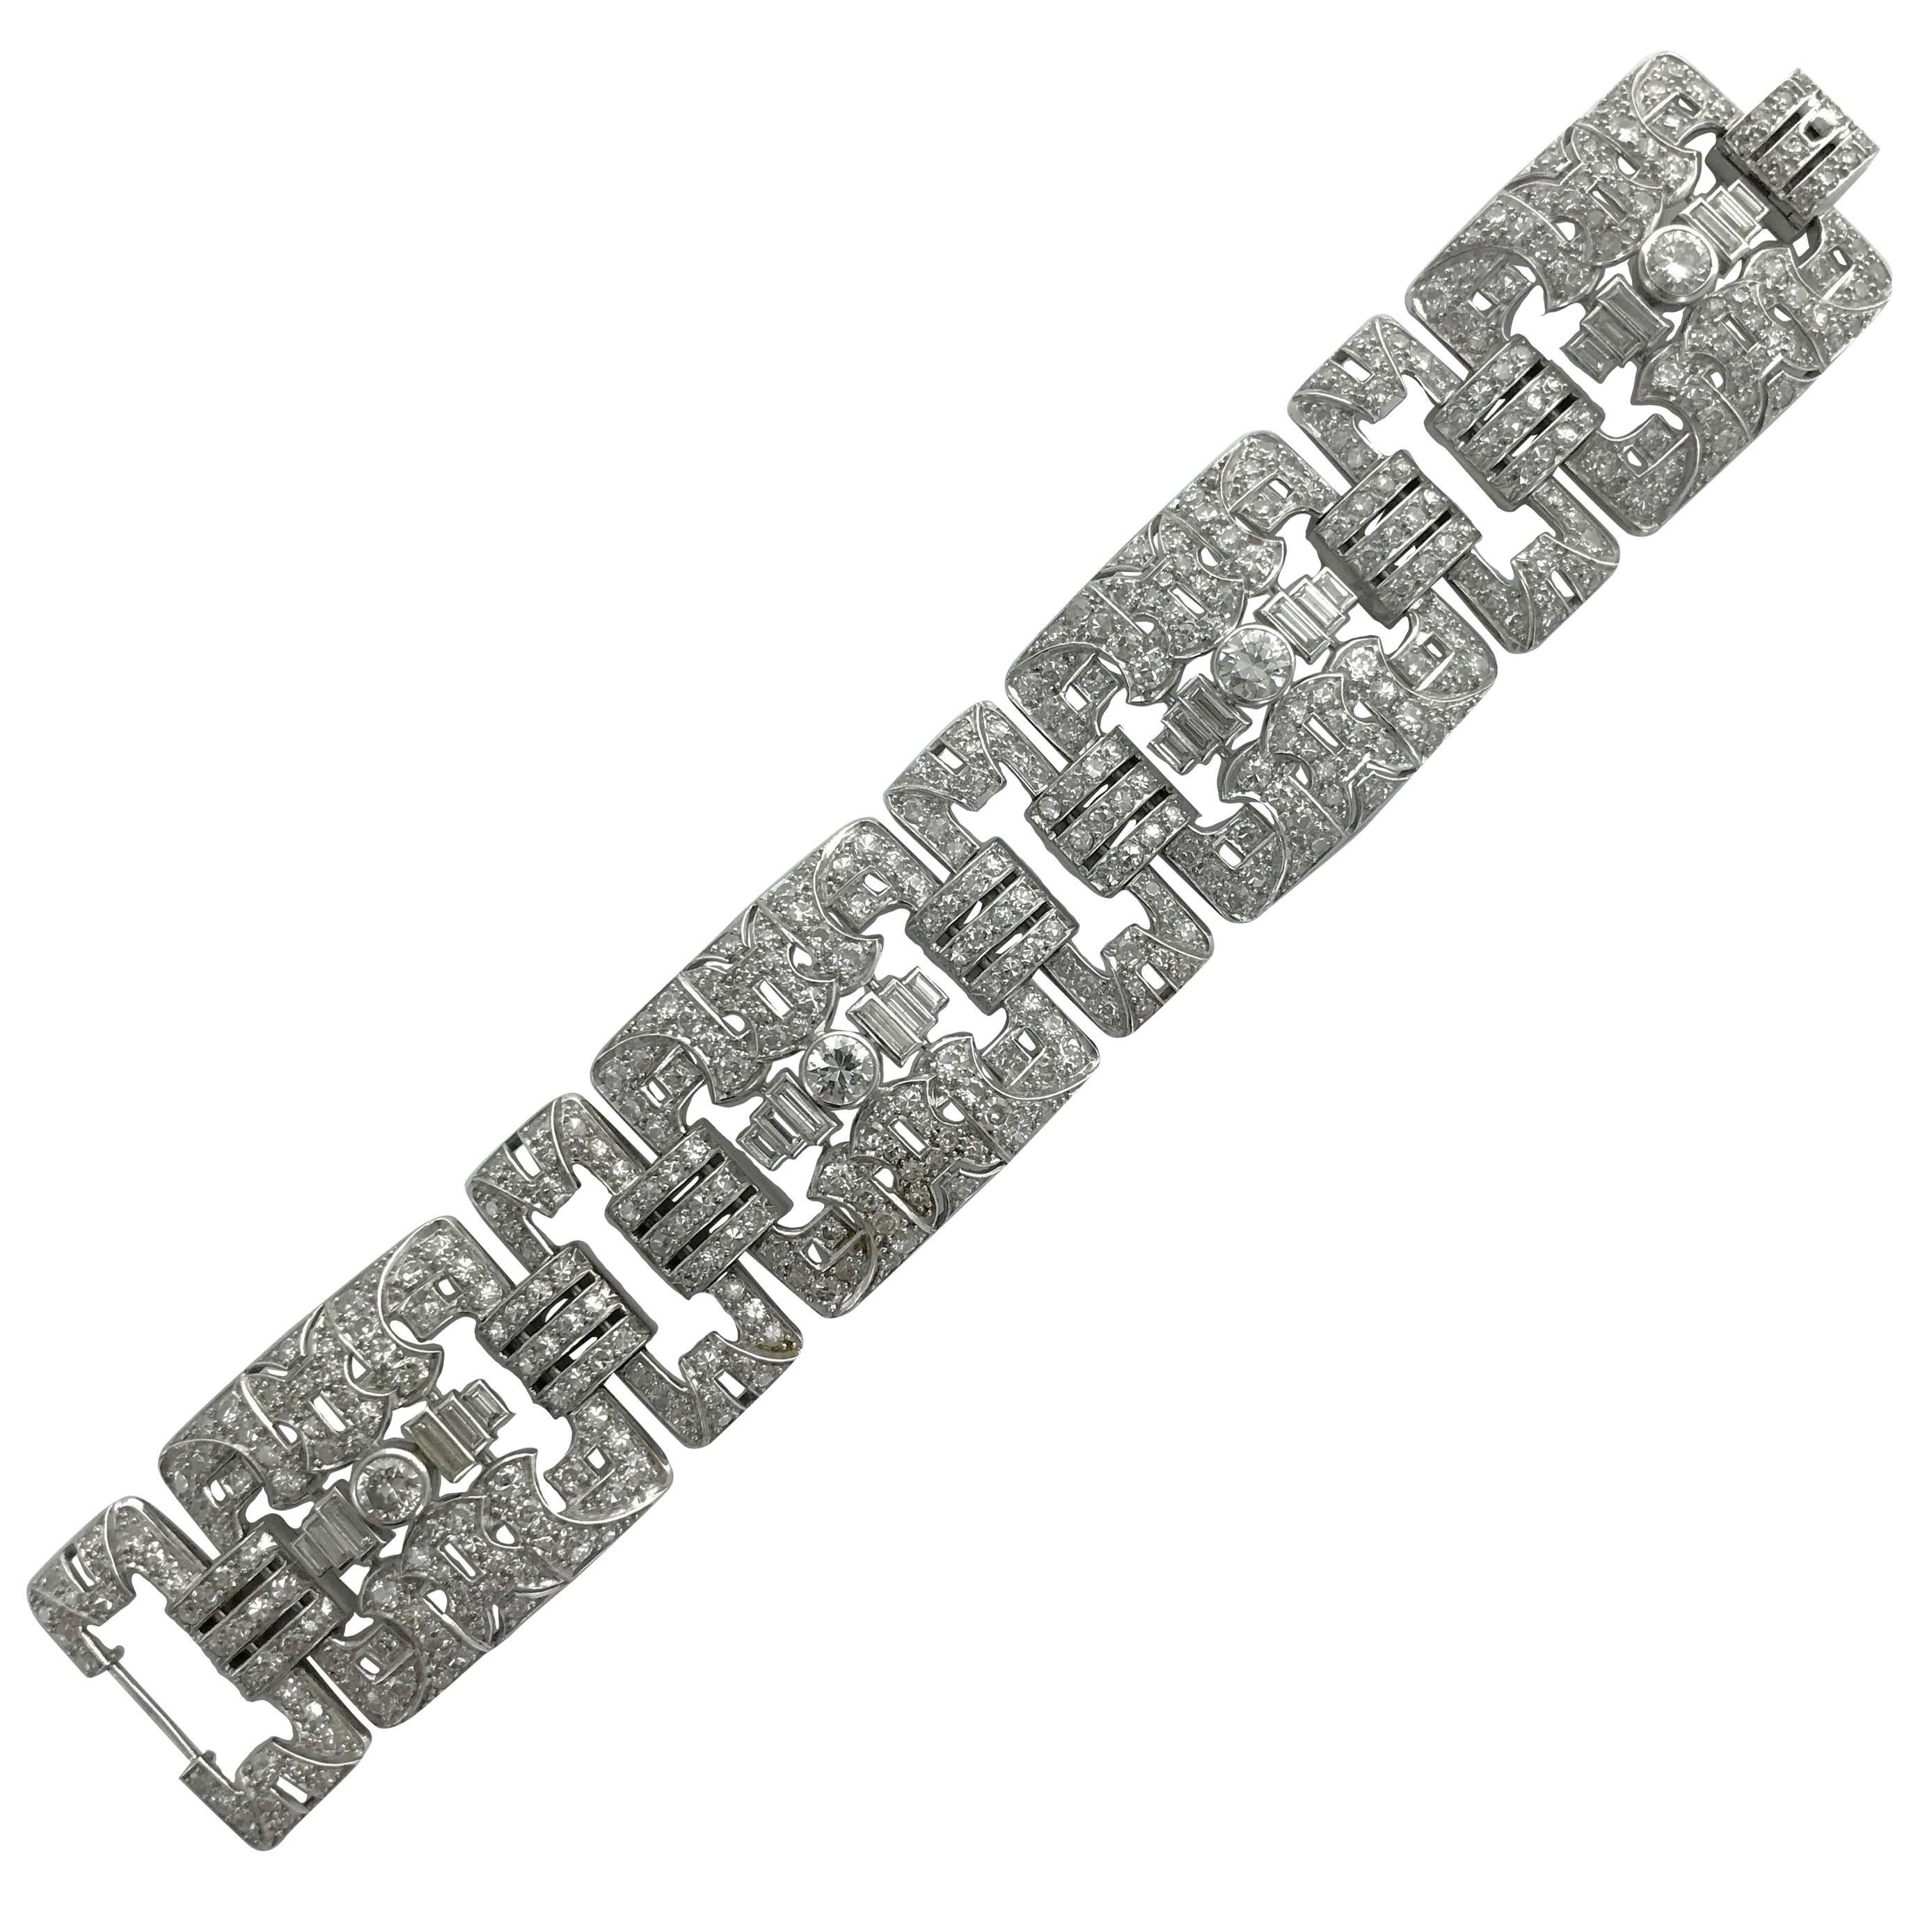 Art Deco Diamond Platinum Bracelet. Typical Design, Simple, Stunning and Elegant.
Circa 1930.
French marks.
Length: 6.69 inches.
Width: 1.18 inches.